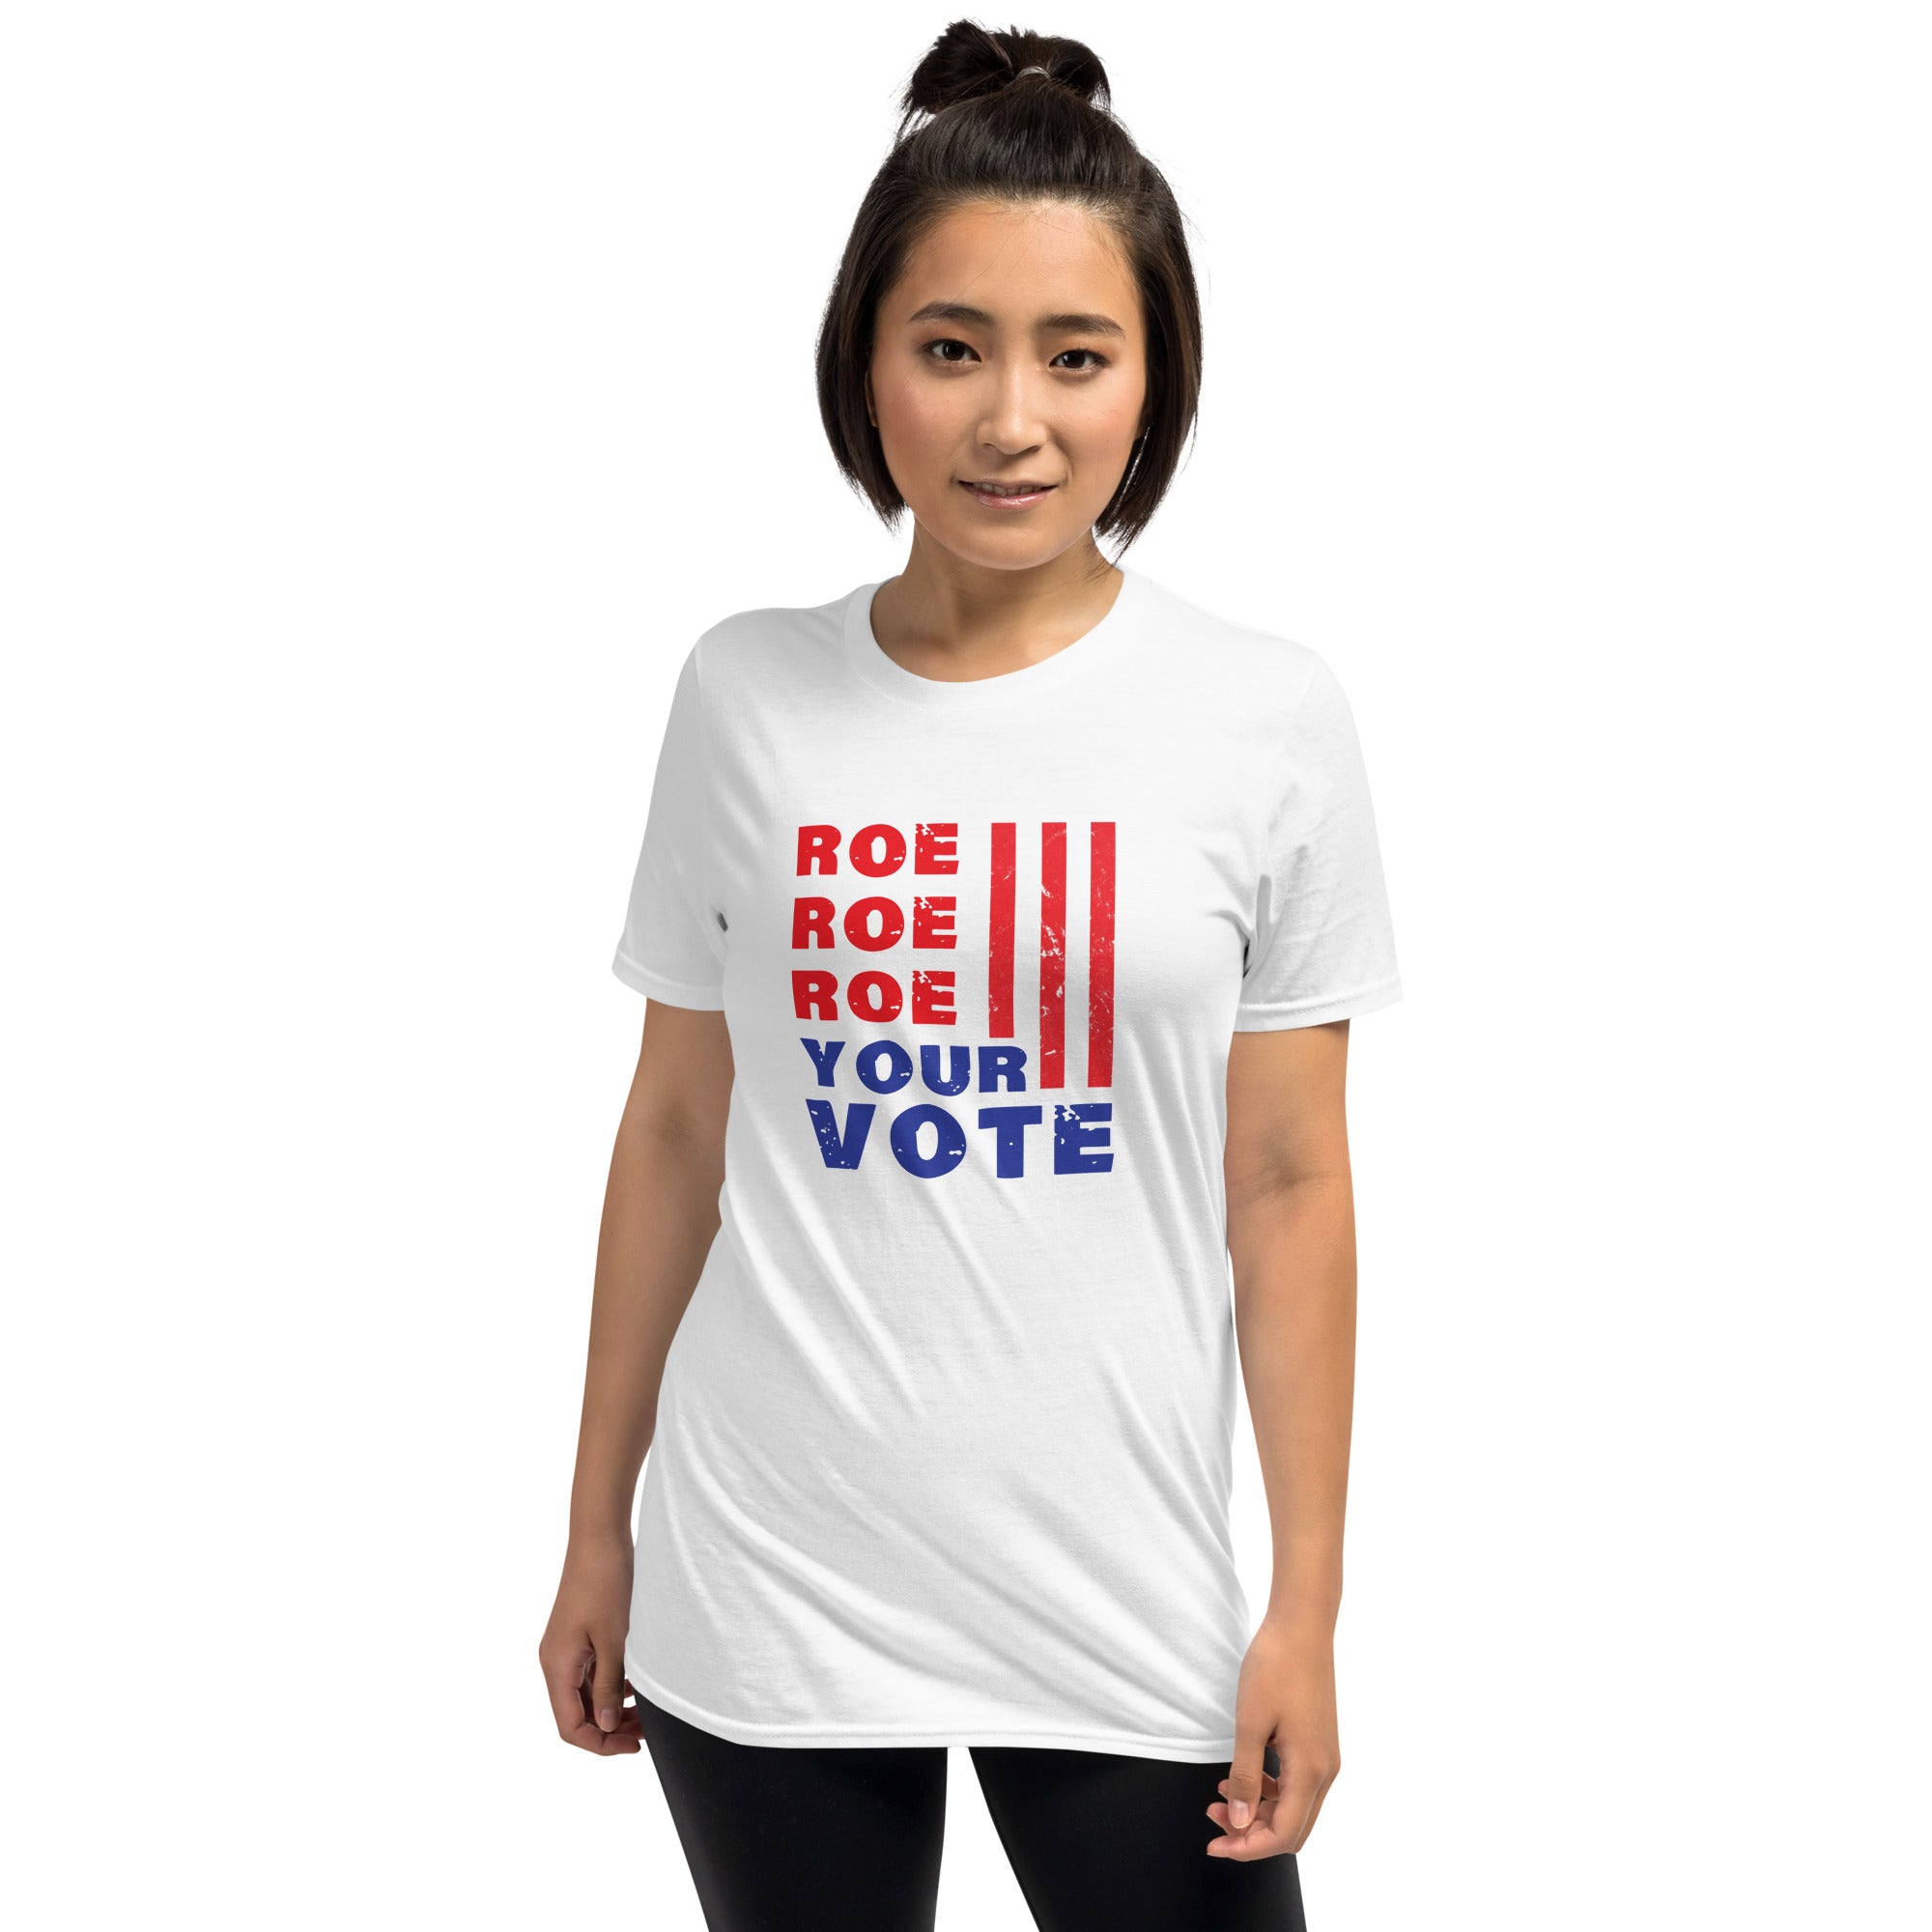 Roe Roe Roe Your Vote Graphic Tee